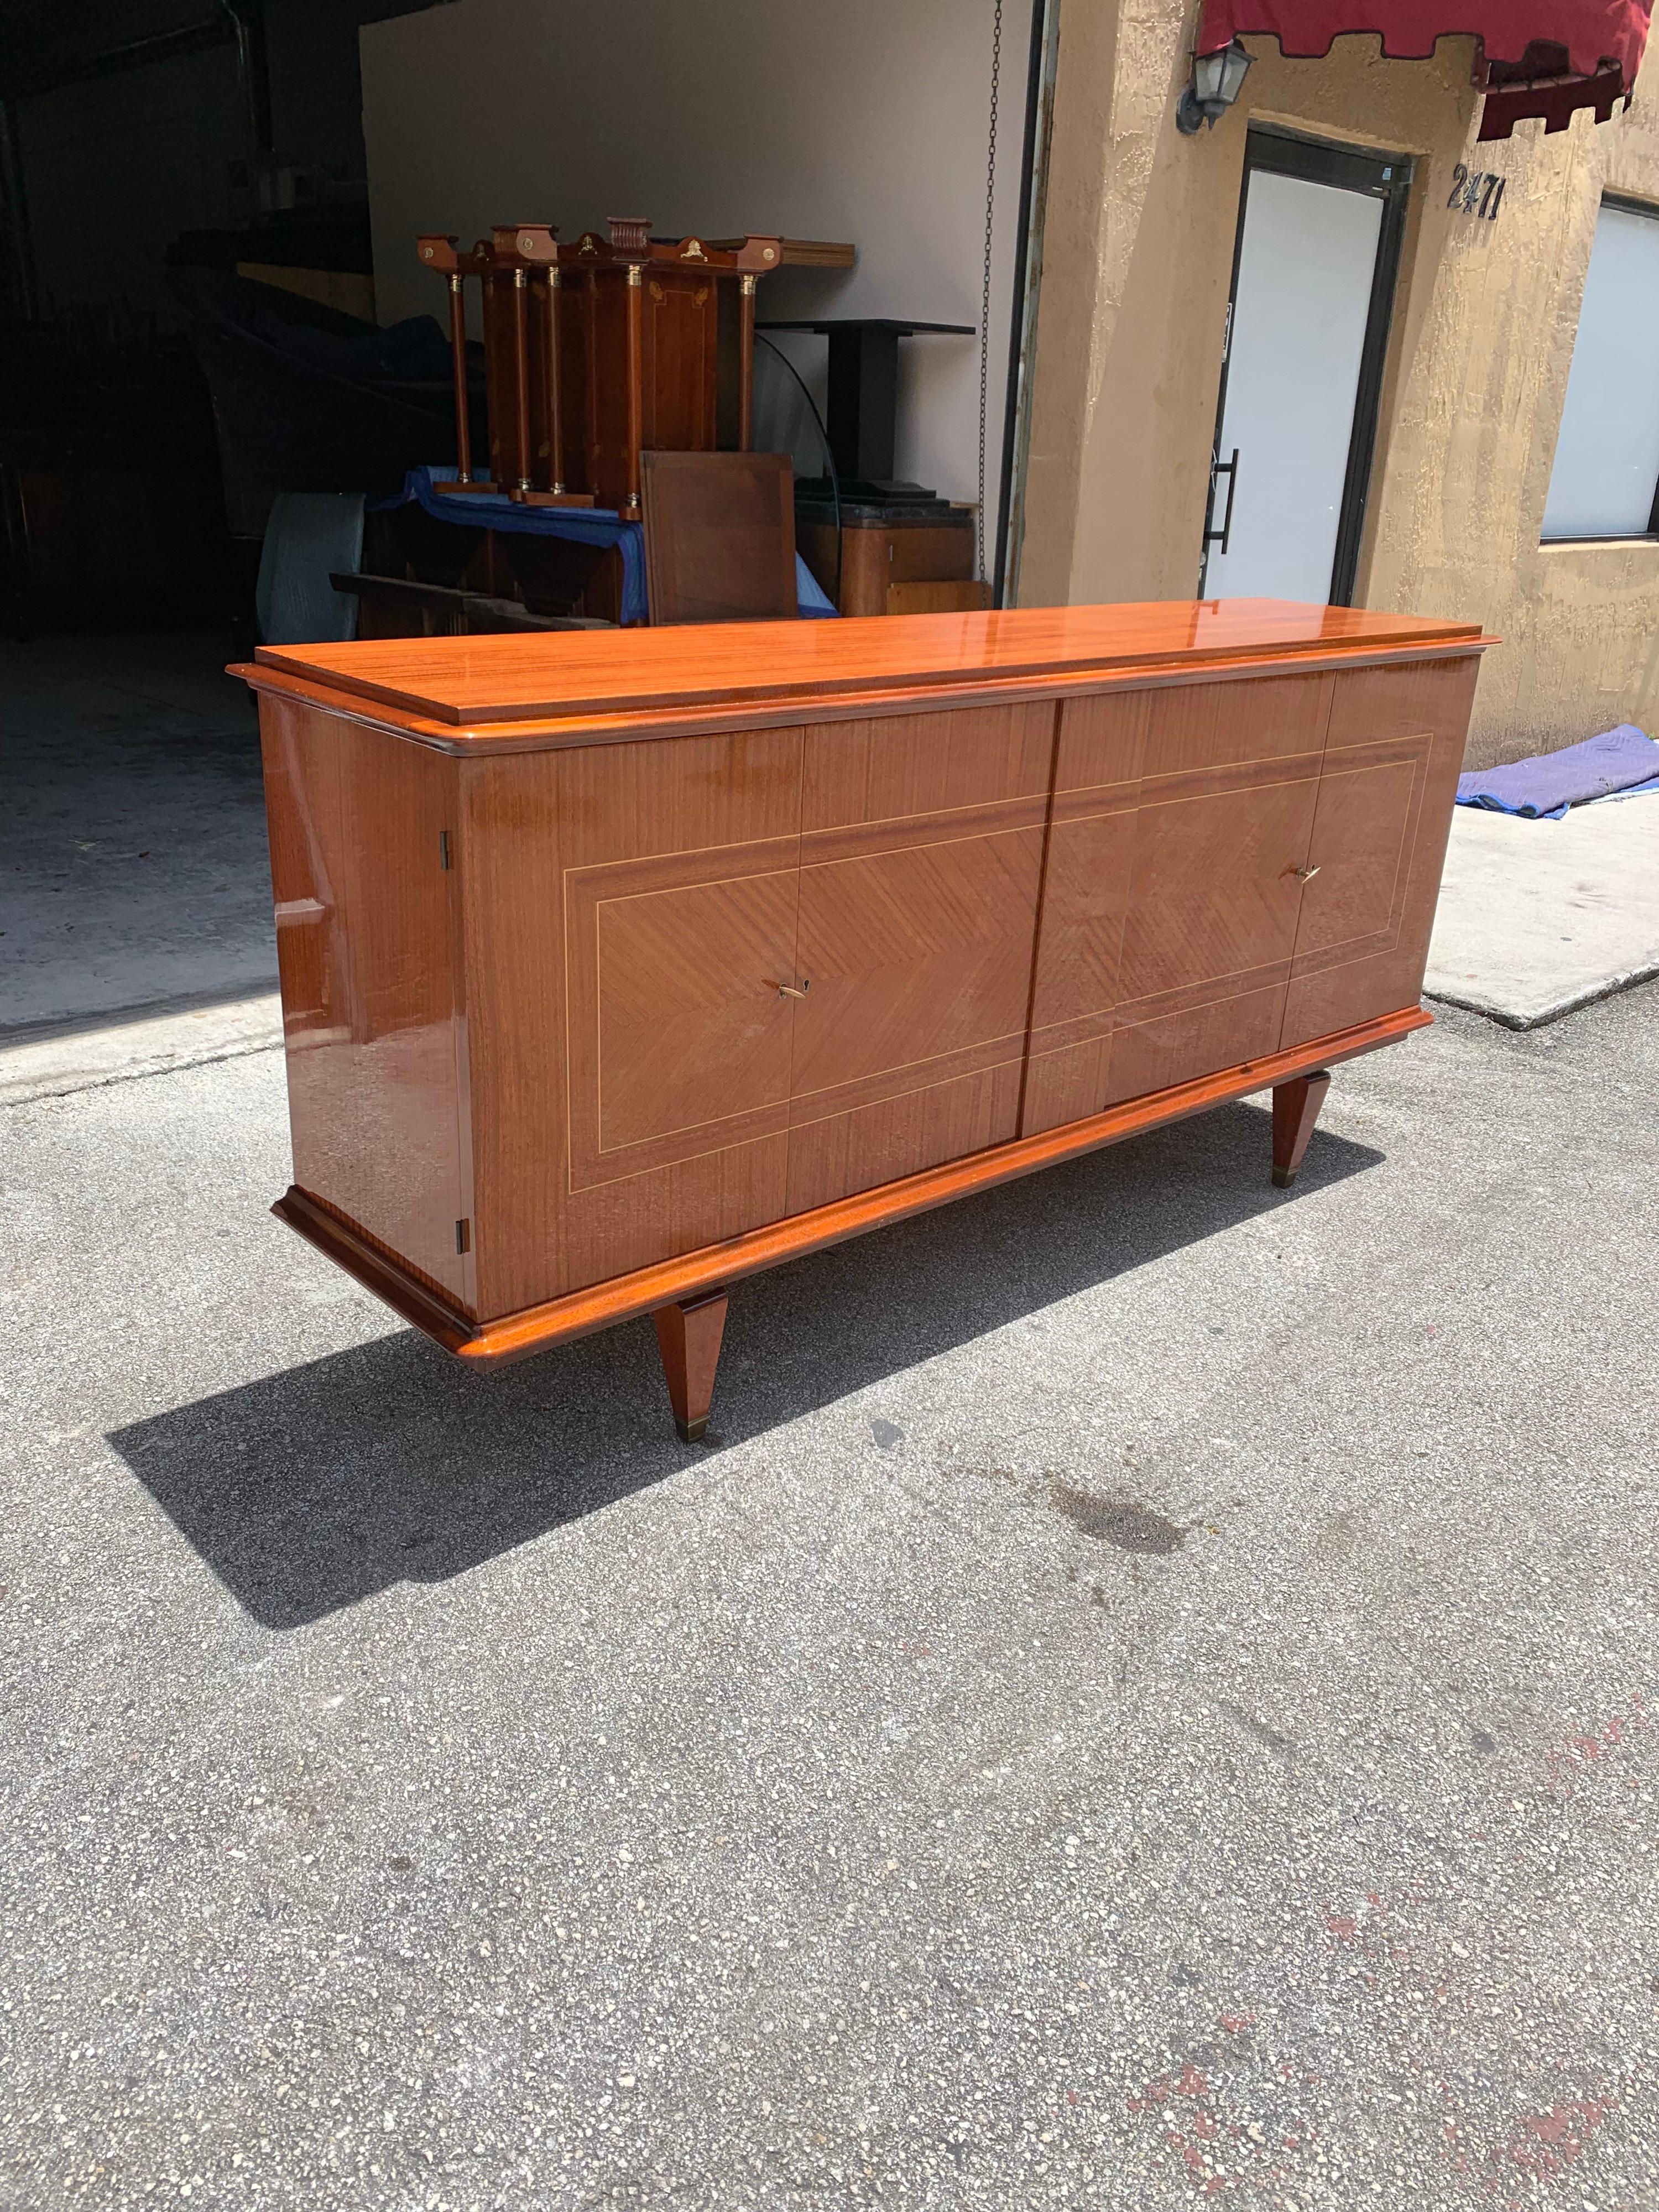 French exotic mahogany sideboard or buffet, circa 1940s. This piece displays very high levels of craftsmanship, the sideboard are in perfect condition, with 3 shelves adjustable and you can remove all the shelves if you need more space, with 2